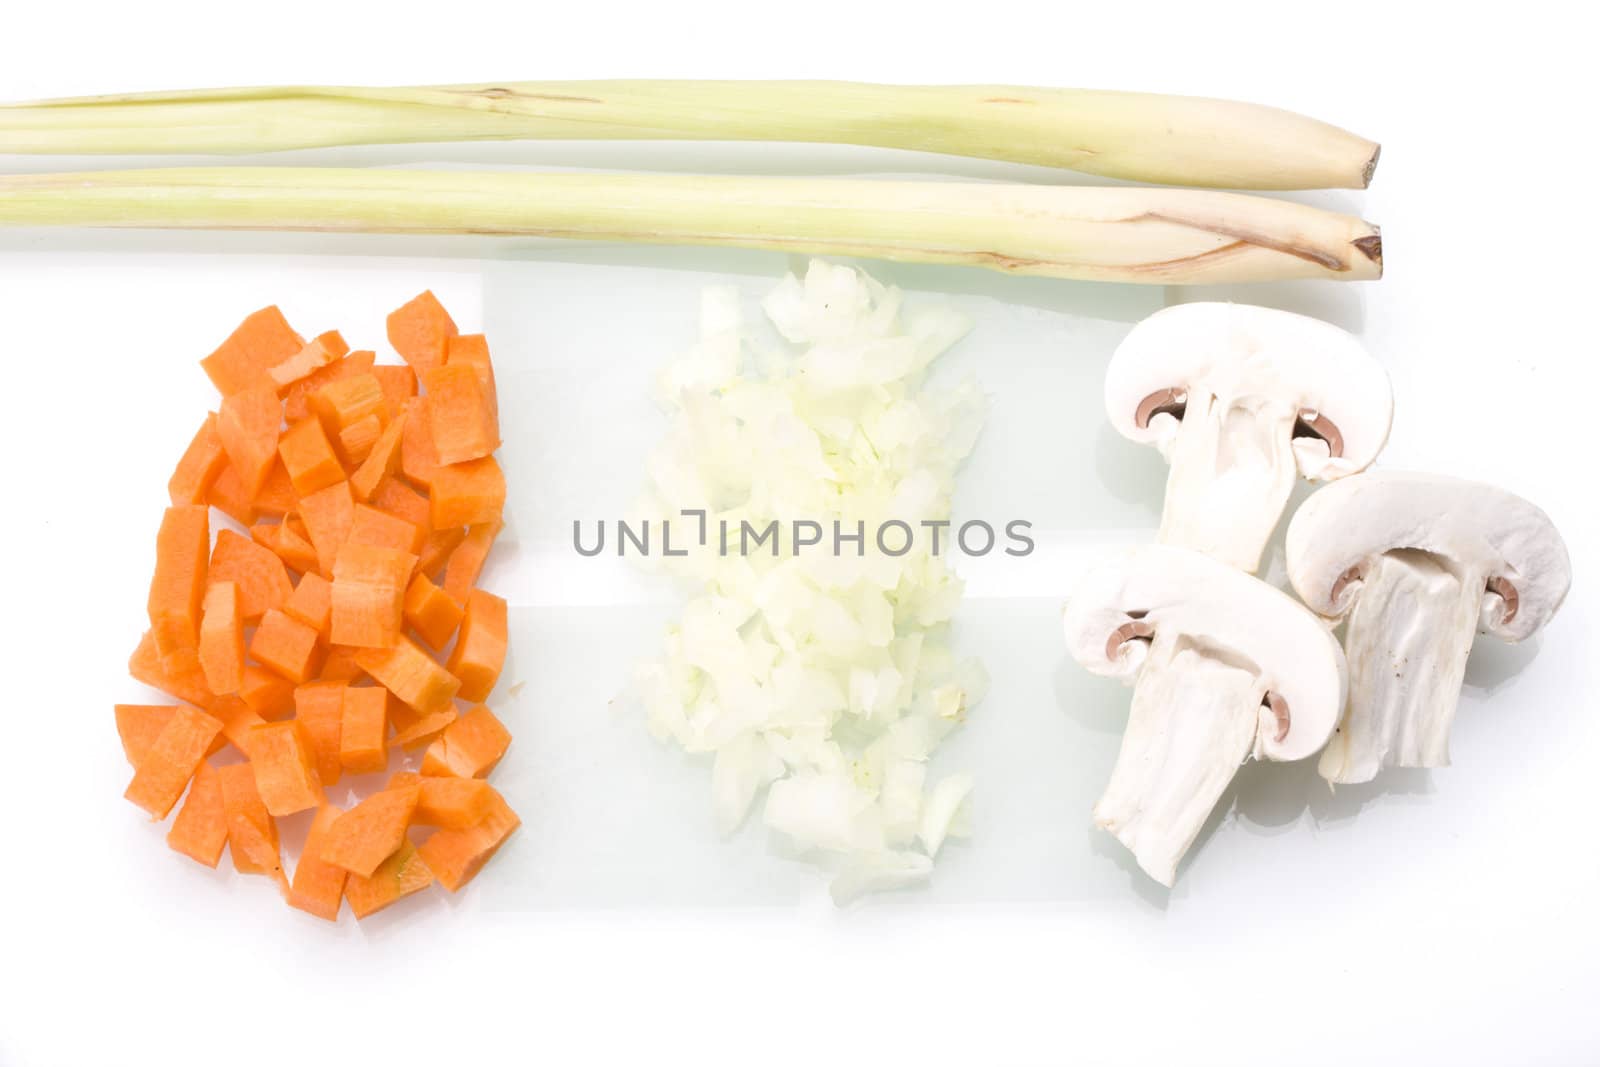 sliced carrots, onions and champignons on a glass chopping board by bernjuer